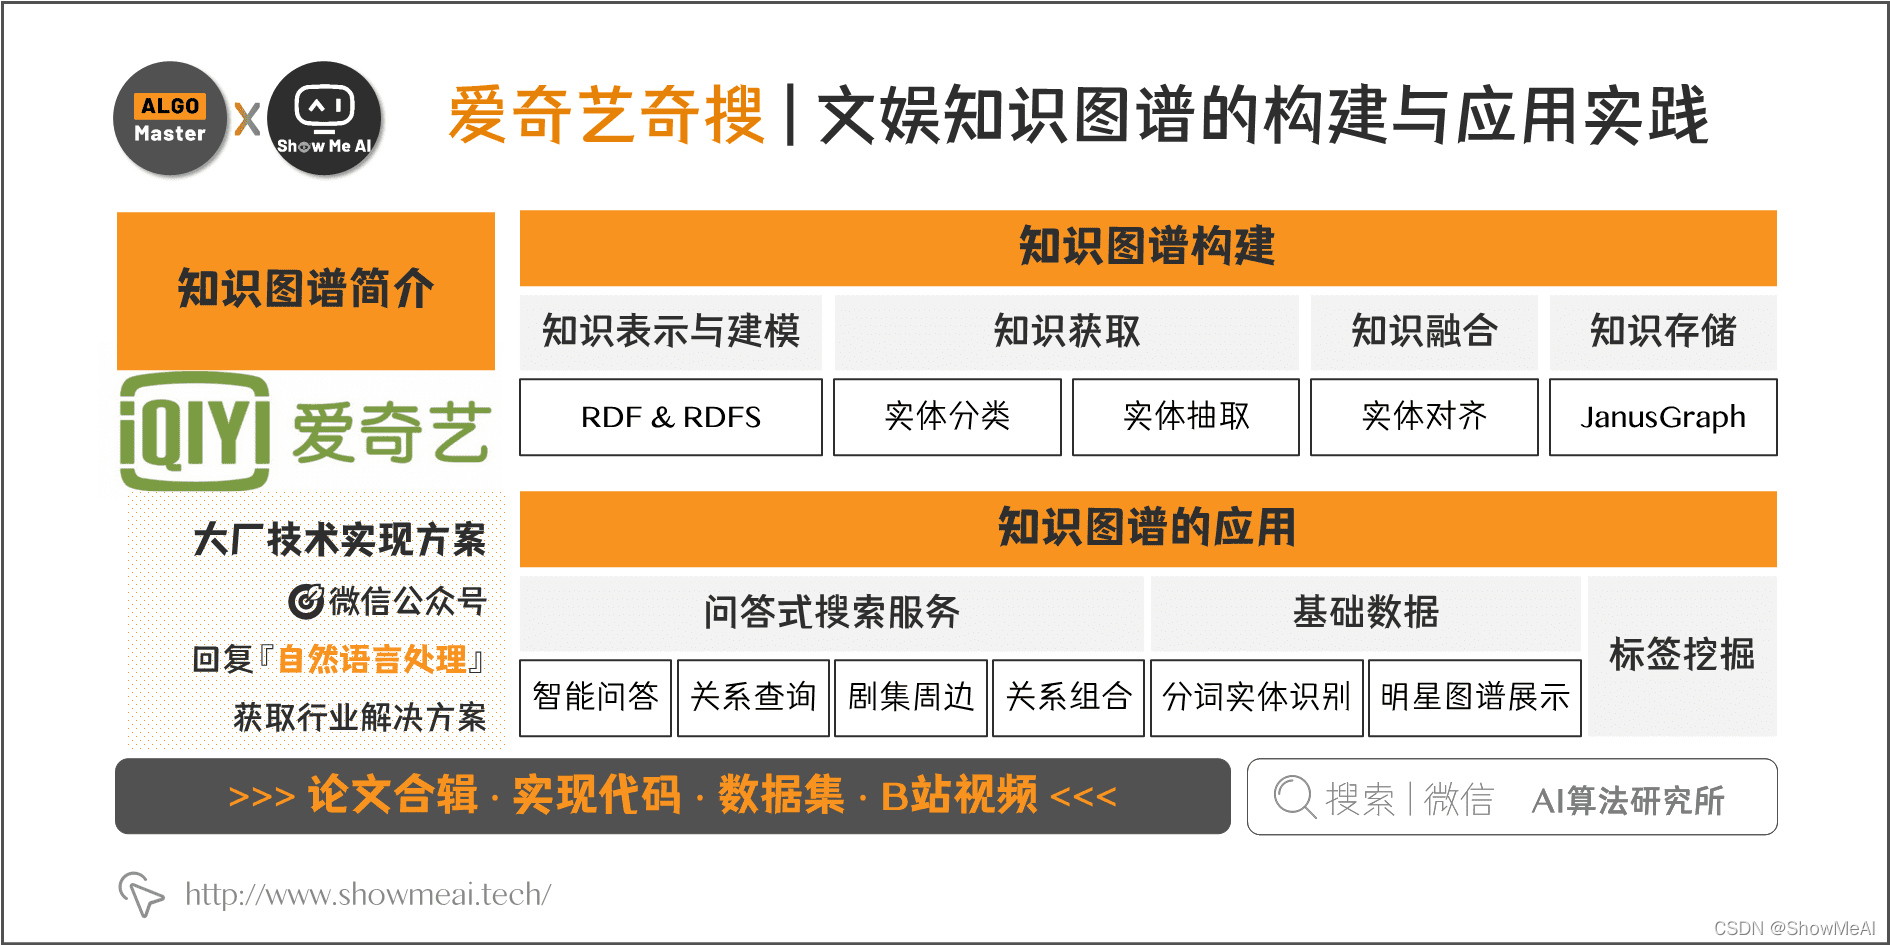  Construction and application of iqiyi cultural and entertainment knowledge map 